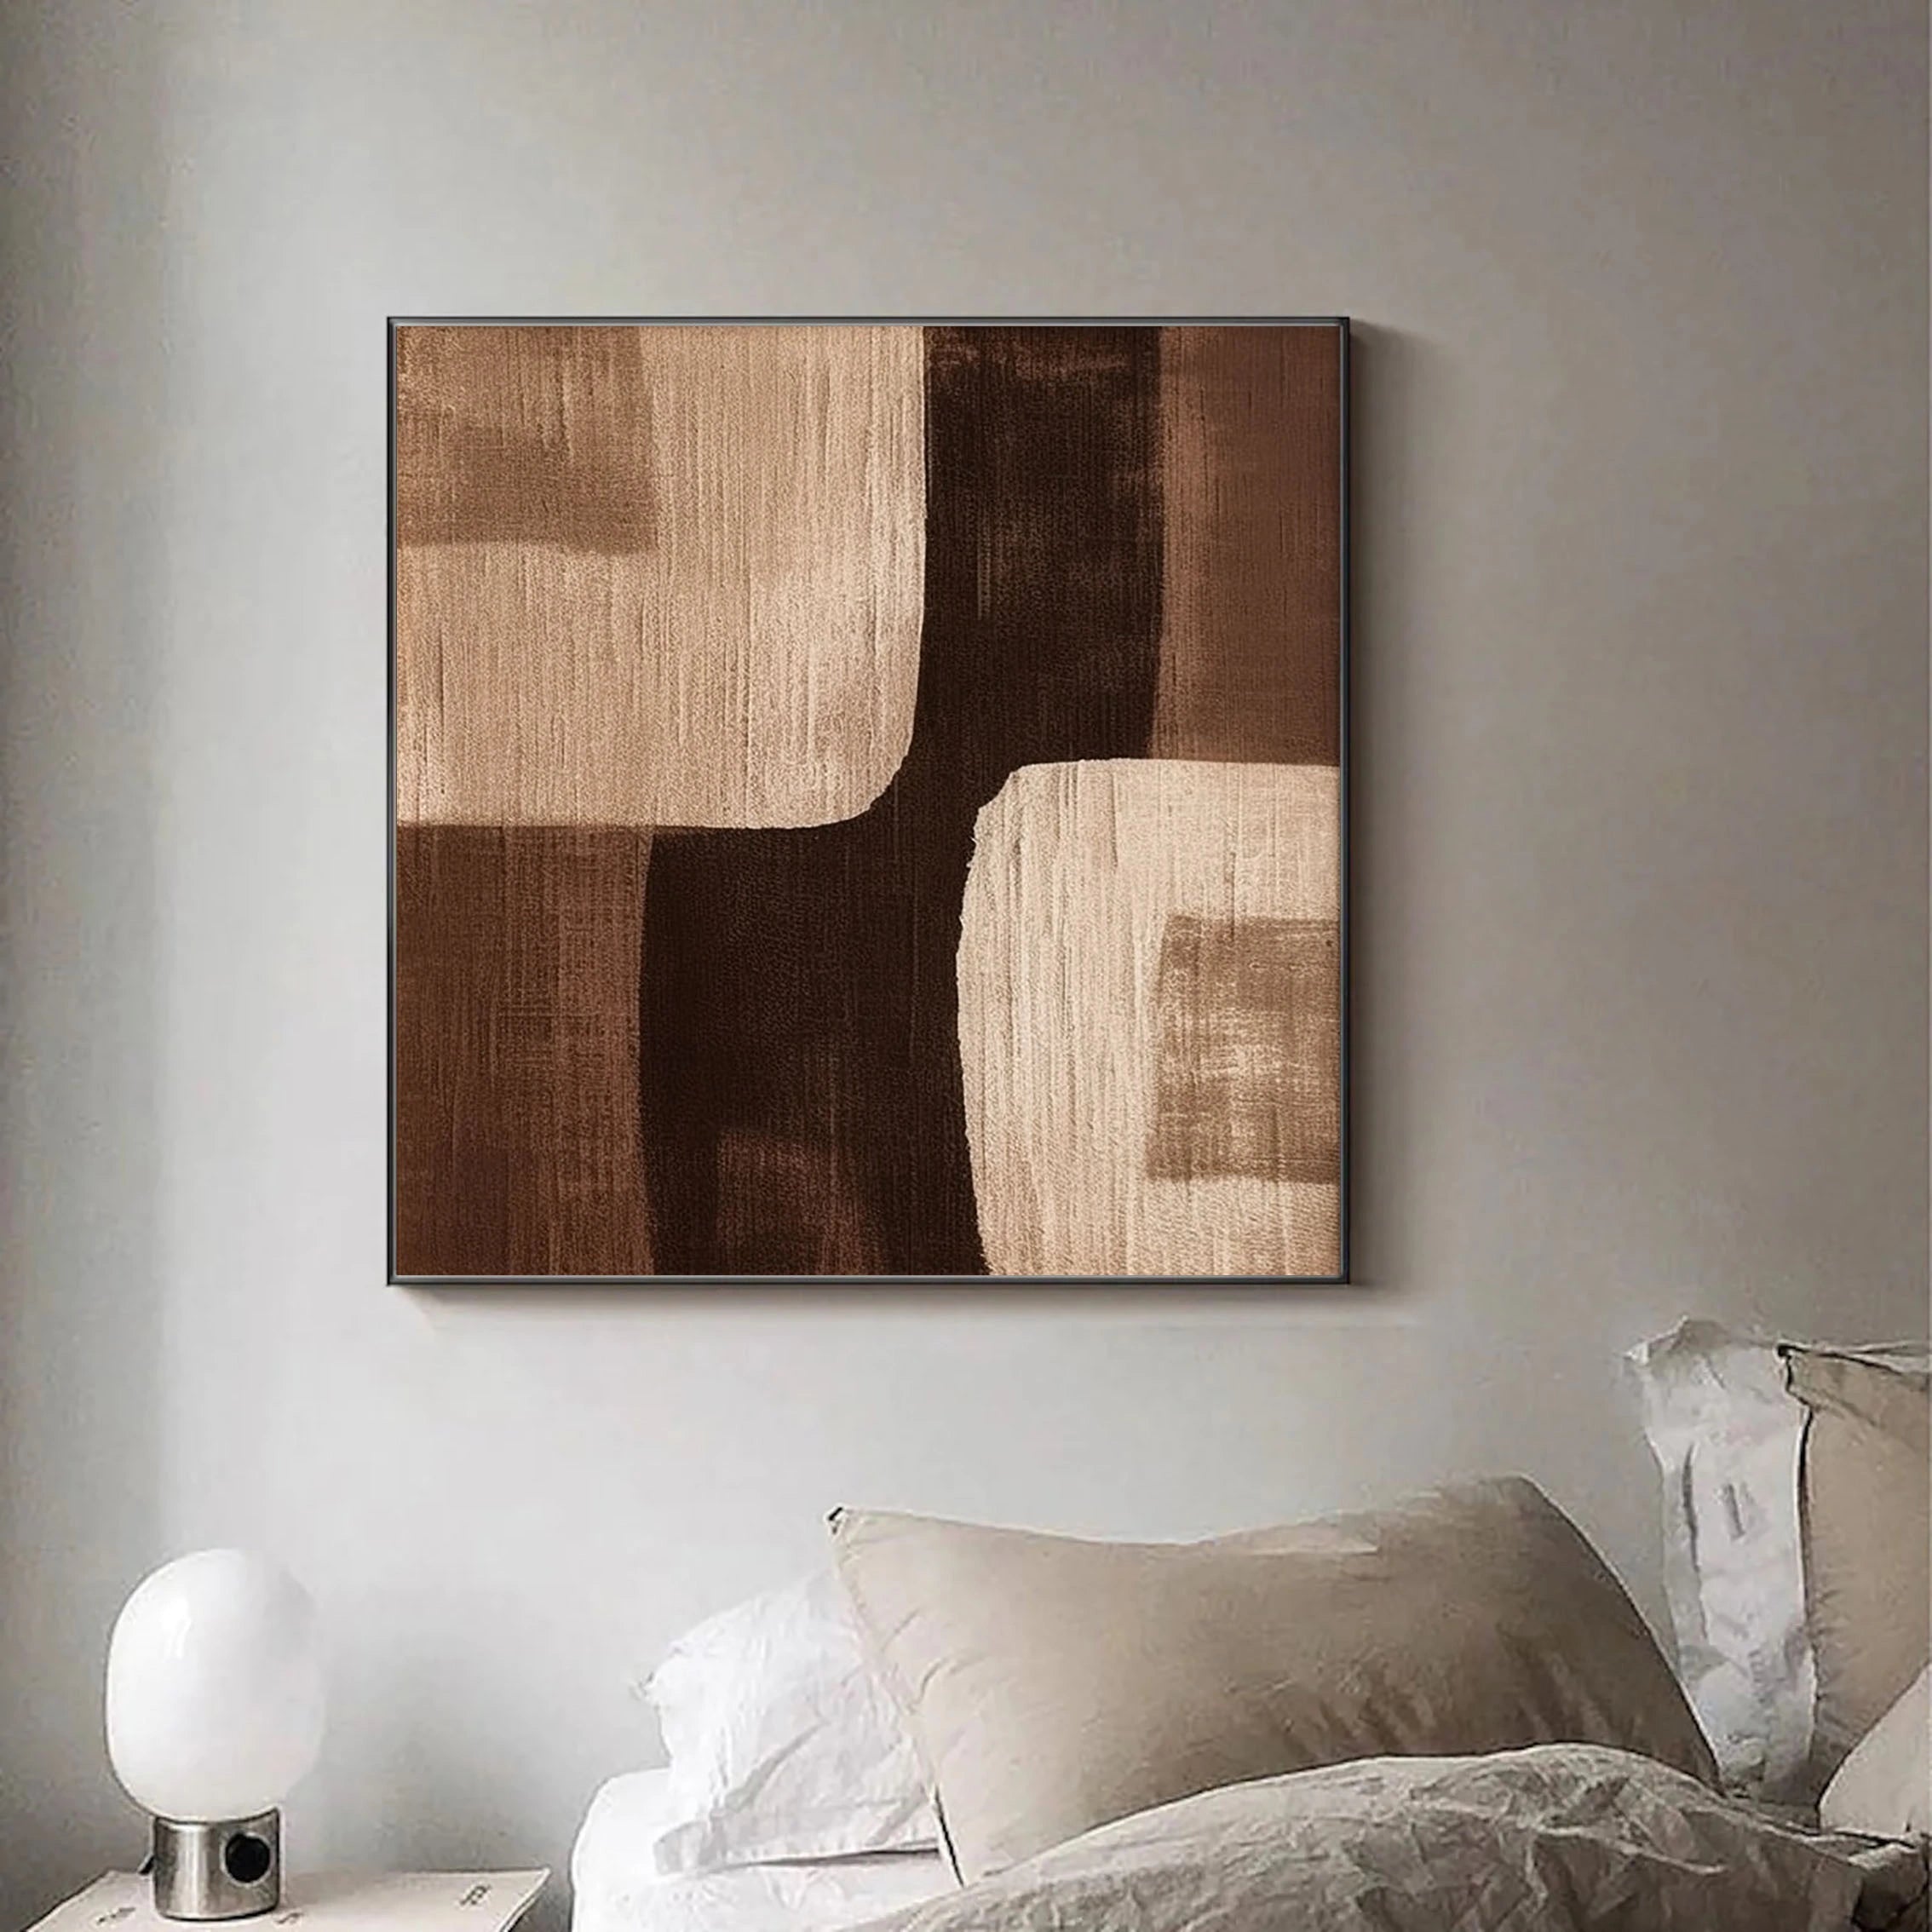 Eleanos Gallery Textured Wabi Sabi Abstract Brown Painting Wall Canvas Artwork